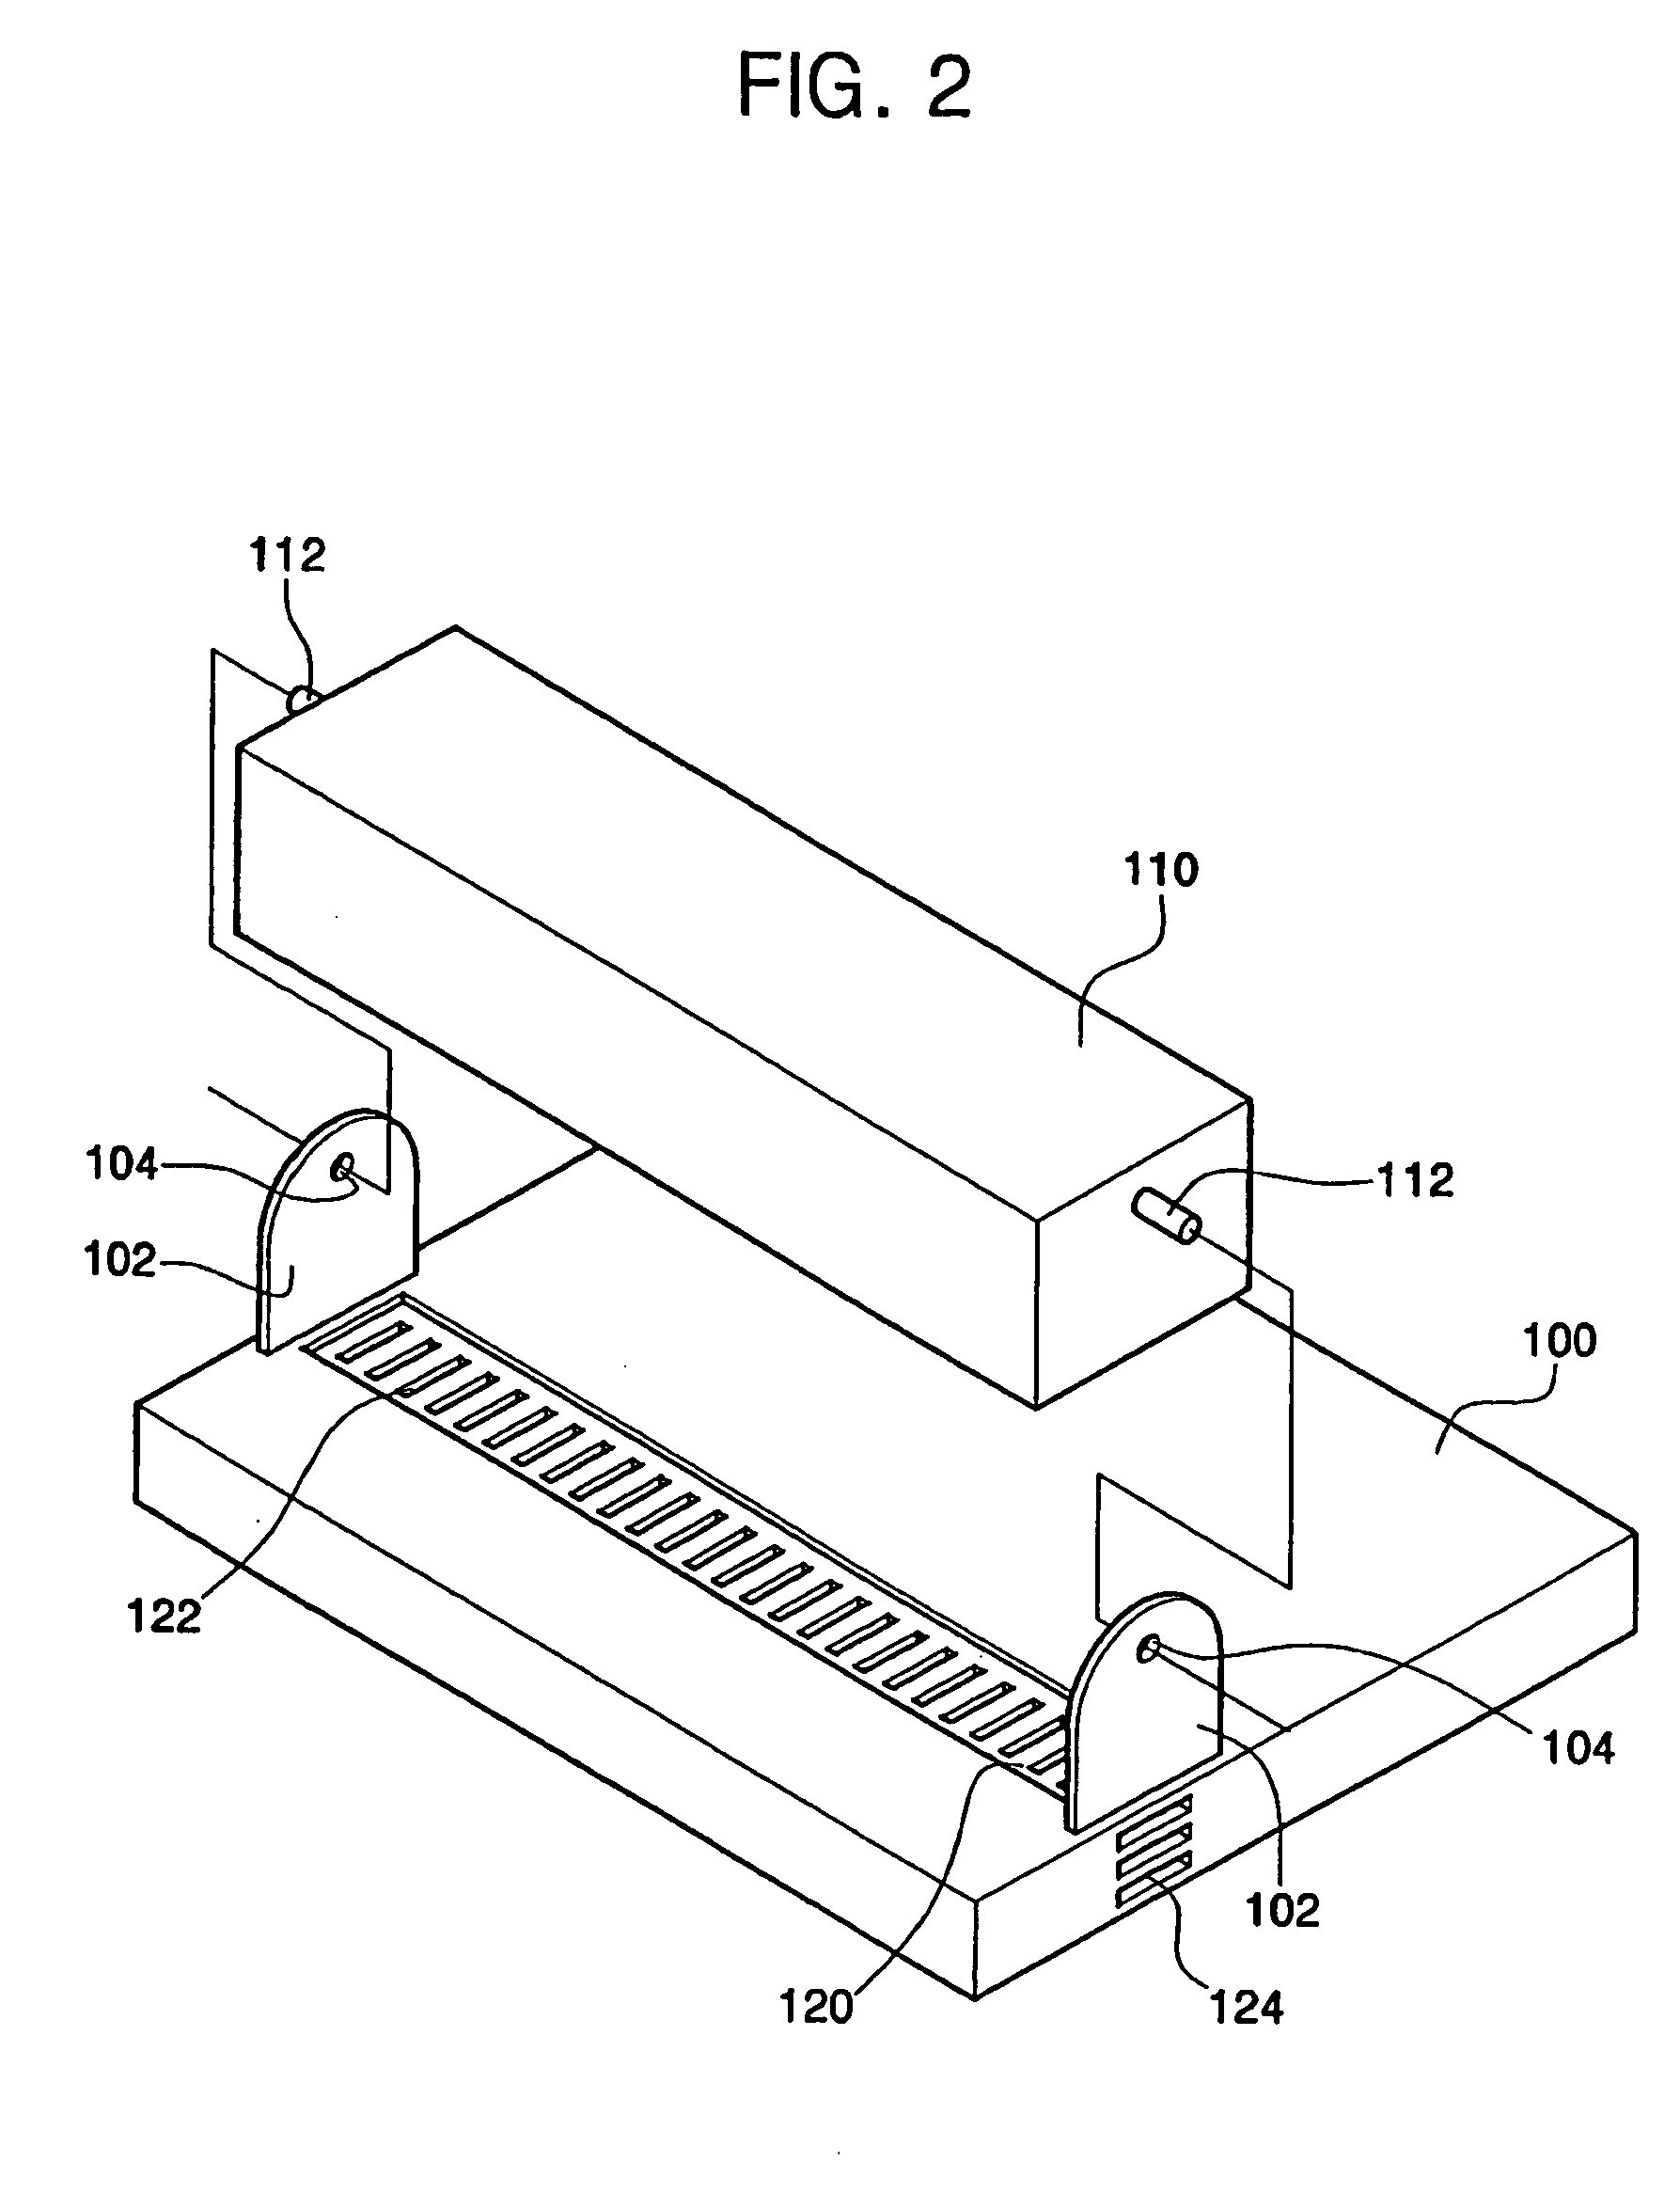 Image forming apparatus with dust collector